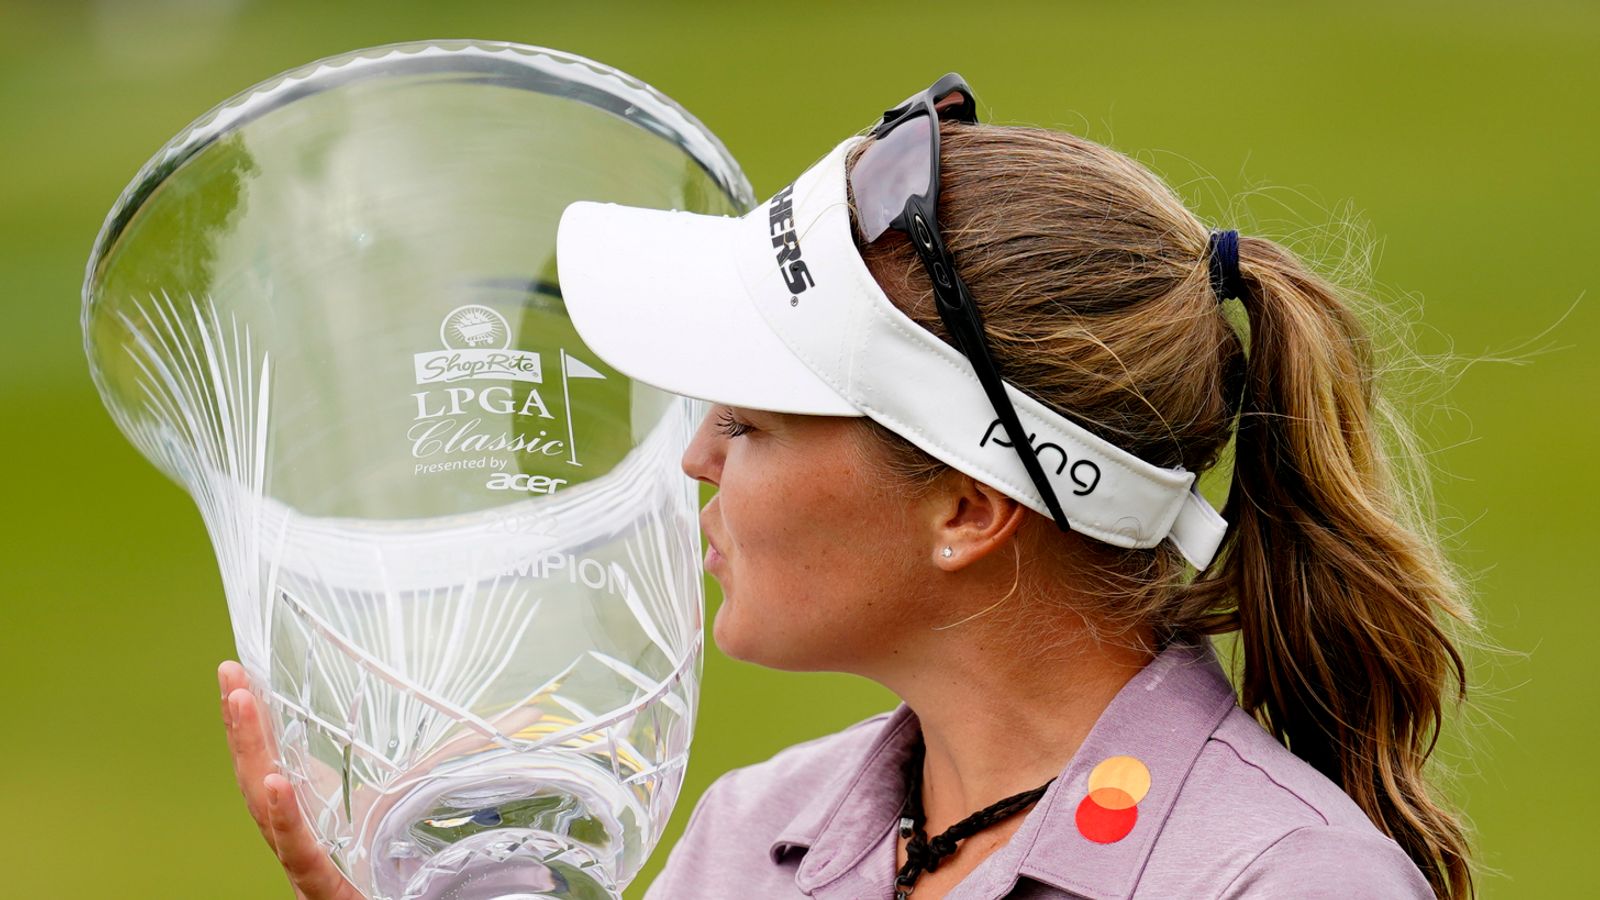 LPGA Tour: Brooke Henderson earns 11th title with play-off victory at Shoprite LPGA Classic